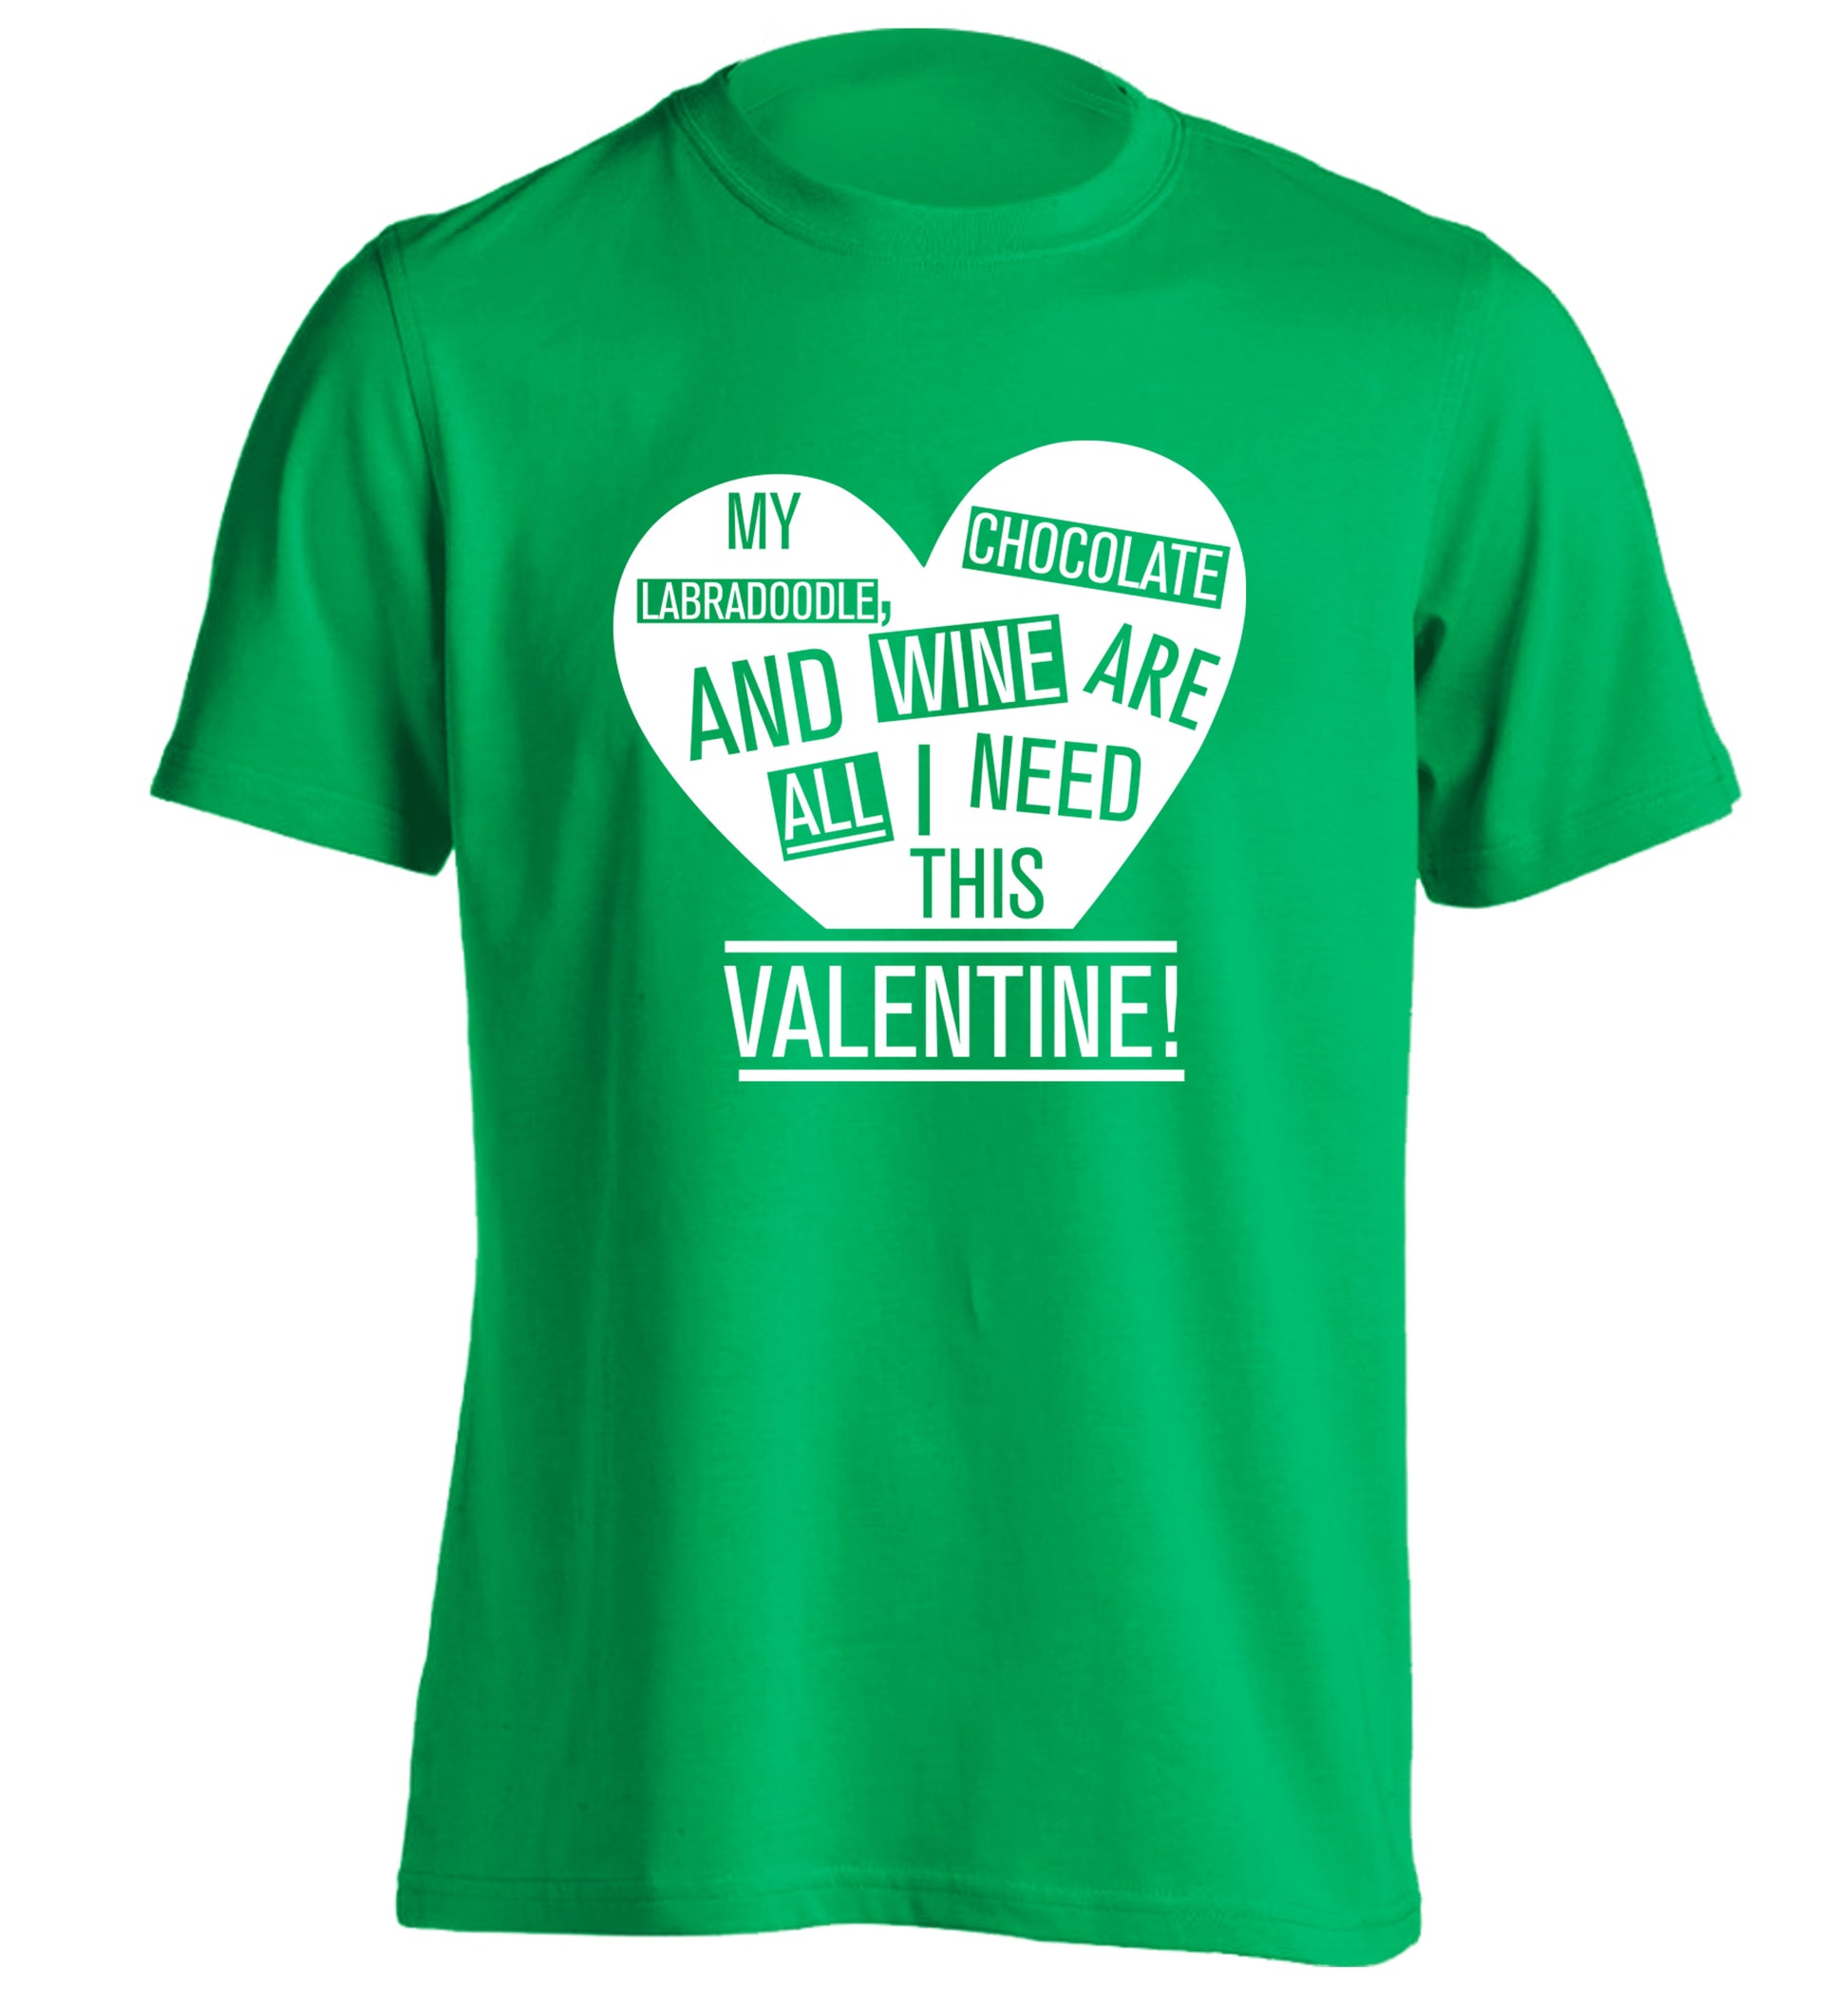 My labradoodle, chocolate and wine are all I need this valentine! adults unisex green Tshirt 2XL